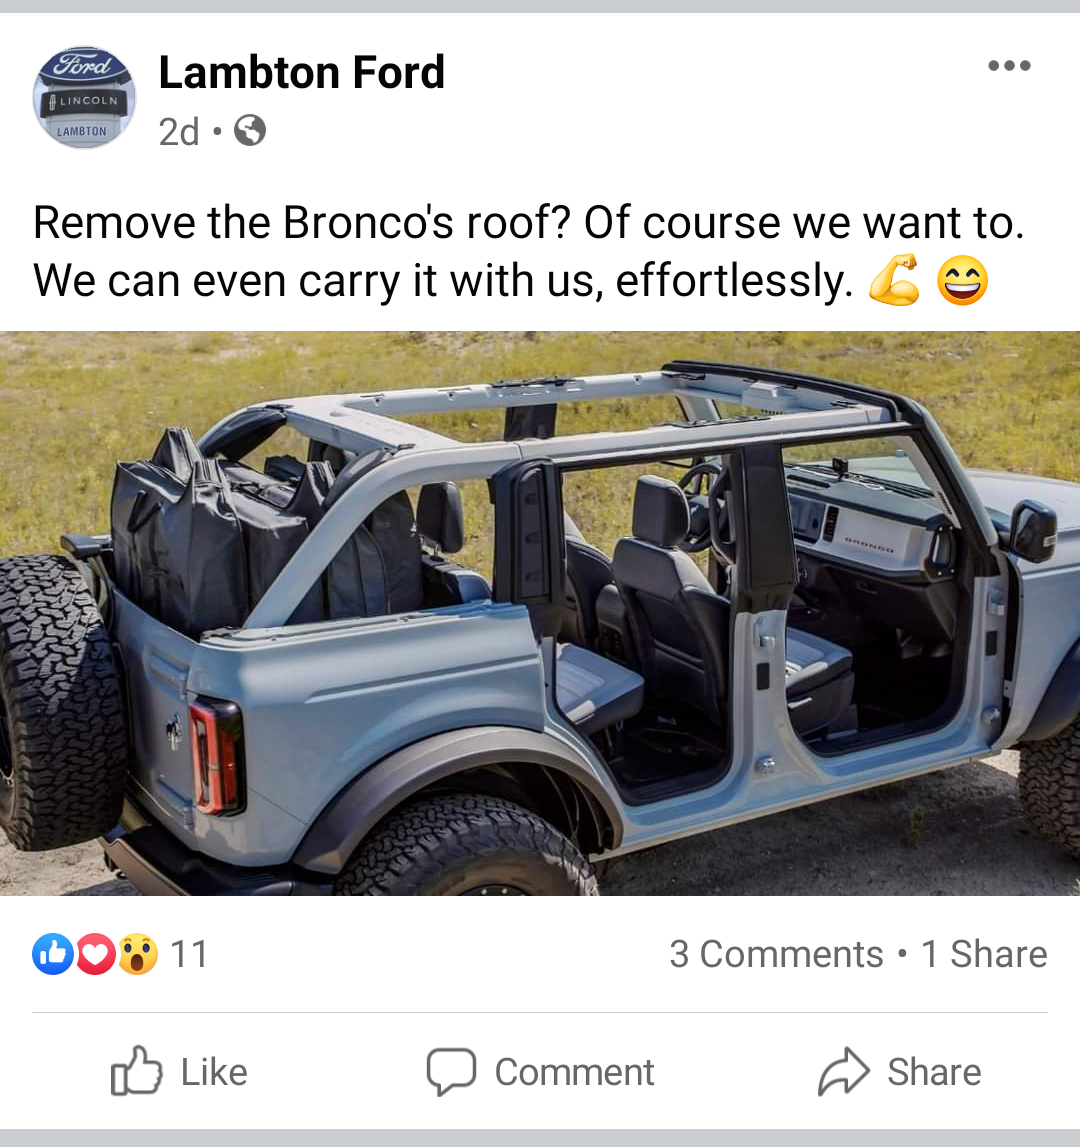 Ford Bronco Dealership is trolling hard with this one 🤣. Screenshot_20210810-115737~2